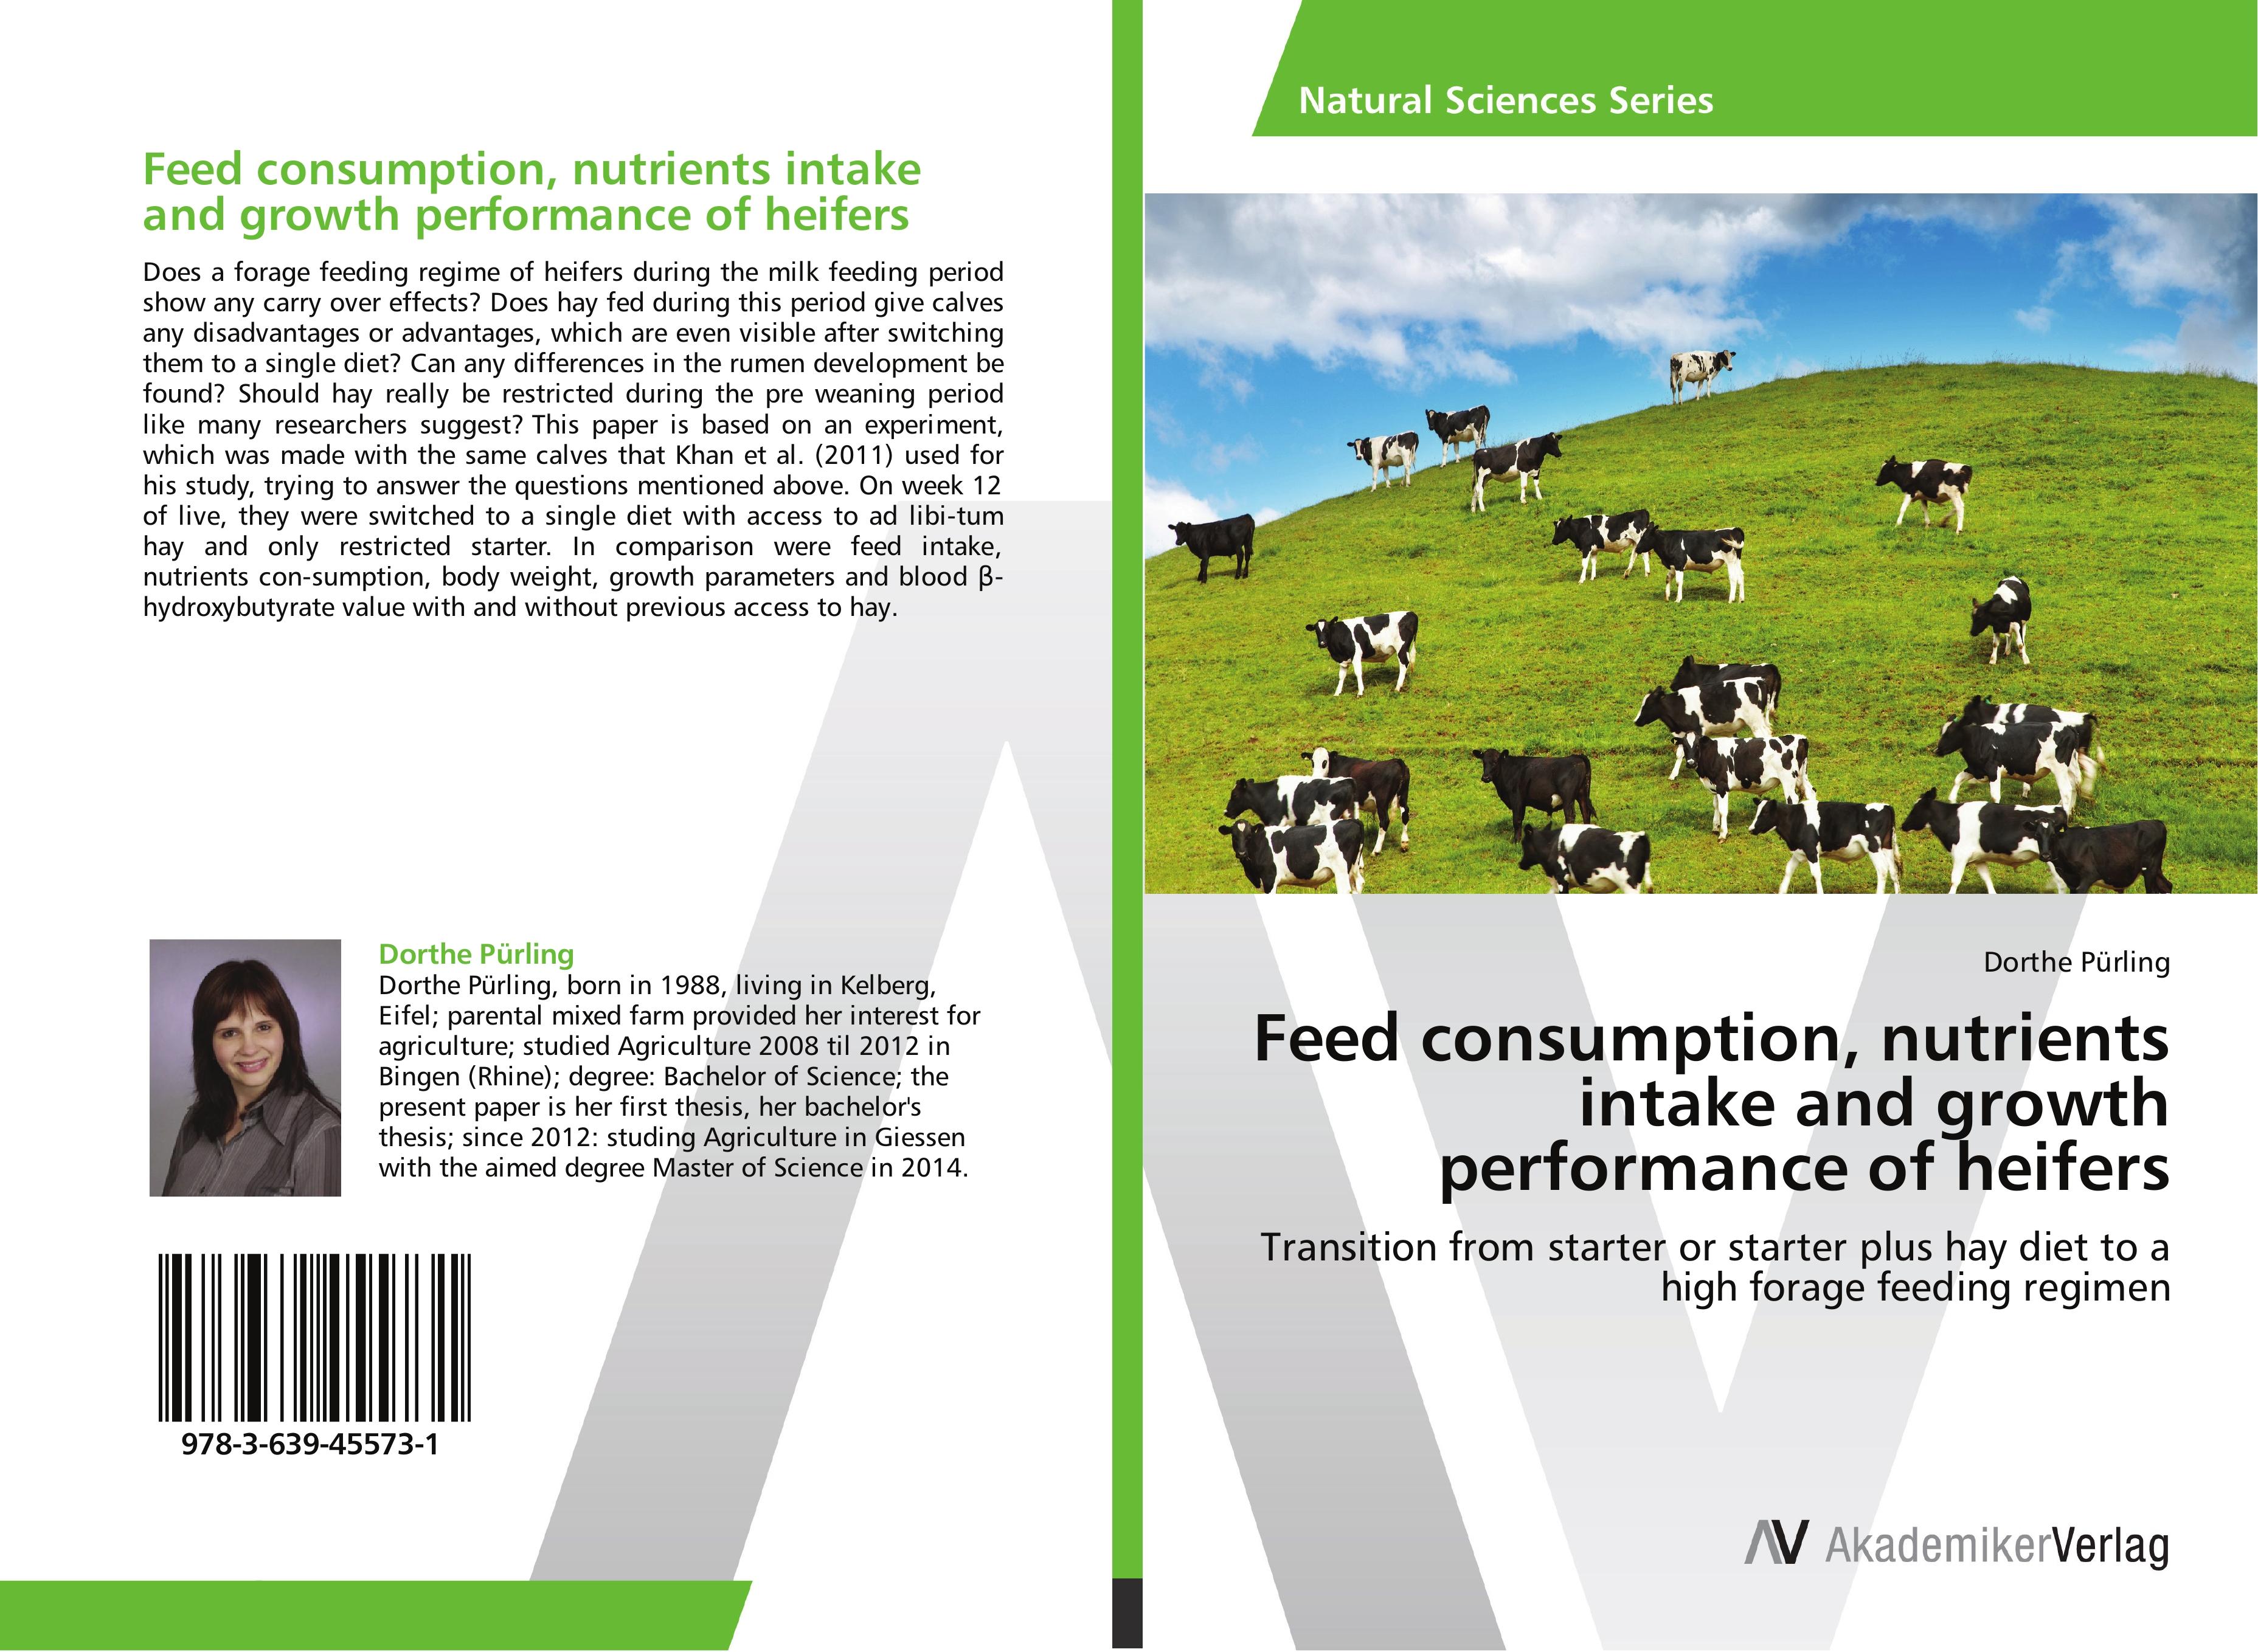 Feed consumption, nutrients intake and growth performance of heifers - Dorthe Puerling